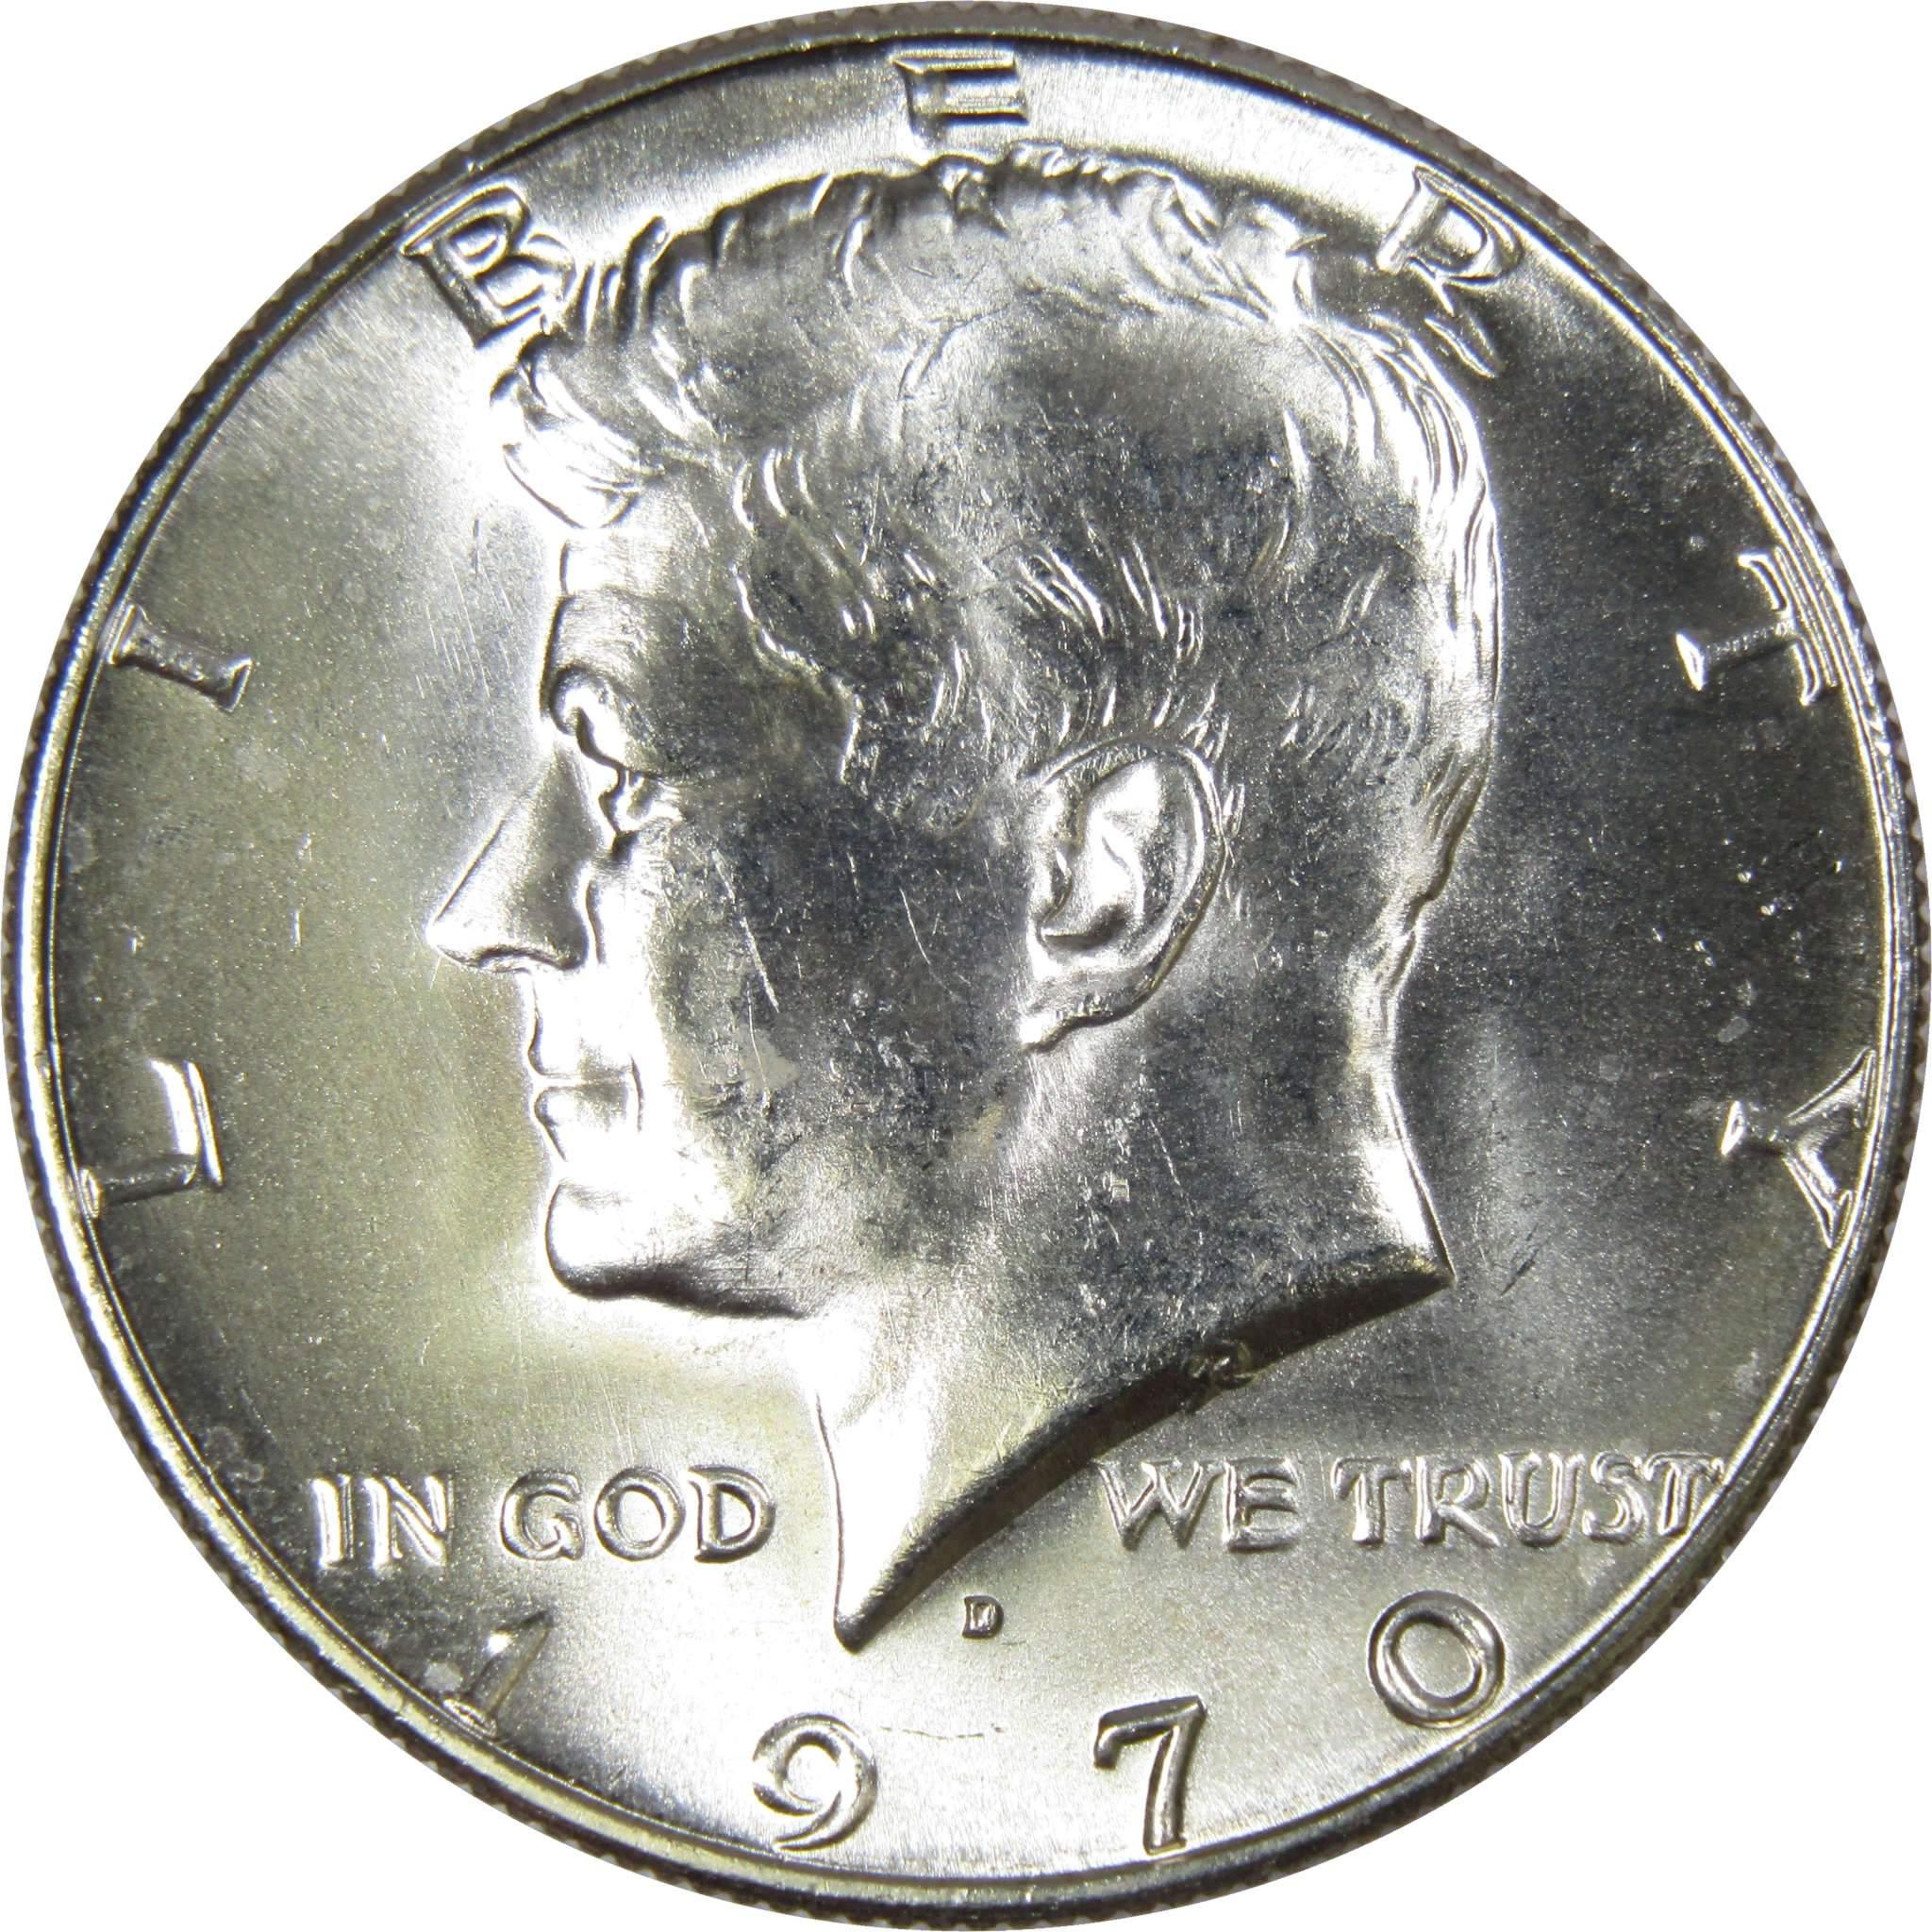 1970 D Kennedy Half Dollar BU Uncirculated Mint State 40% Silver 50c US Coin